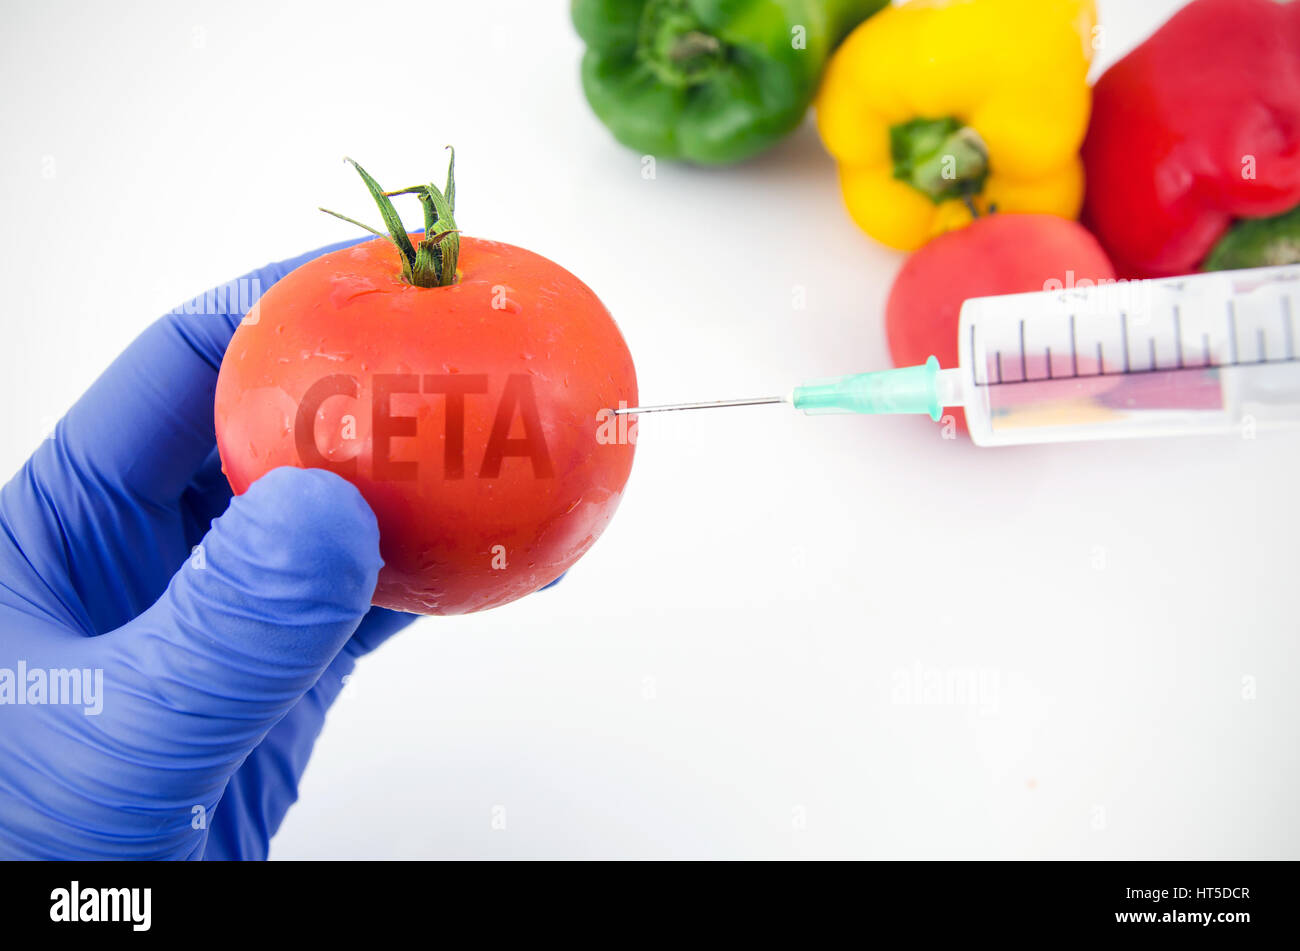 CETA free-trade agreement and Genetic modification of fruits and vegetables concept. Technician uses a syringe. Stock Photo